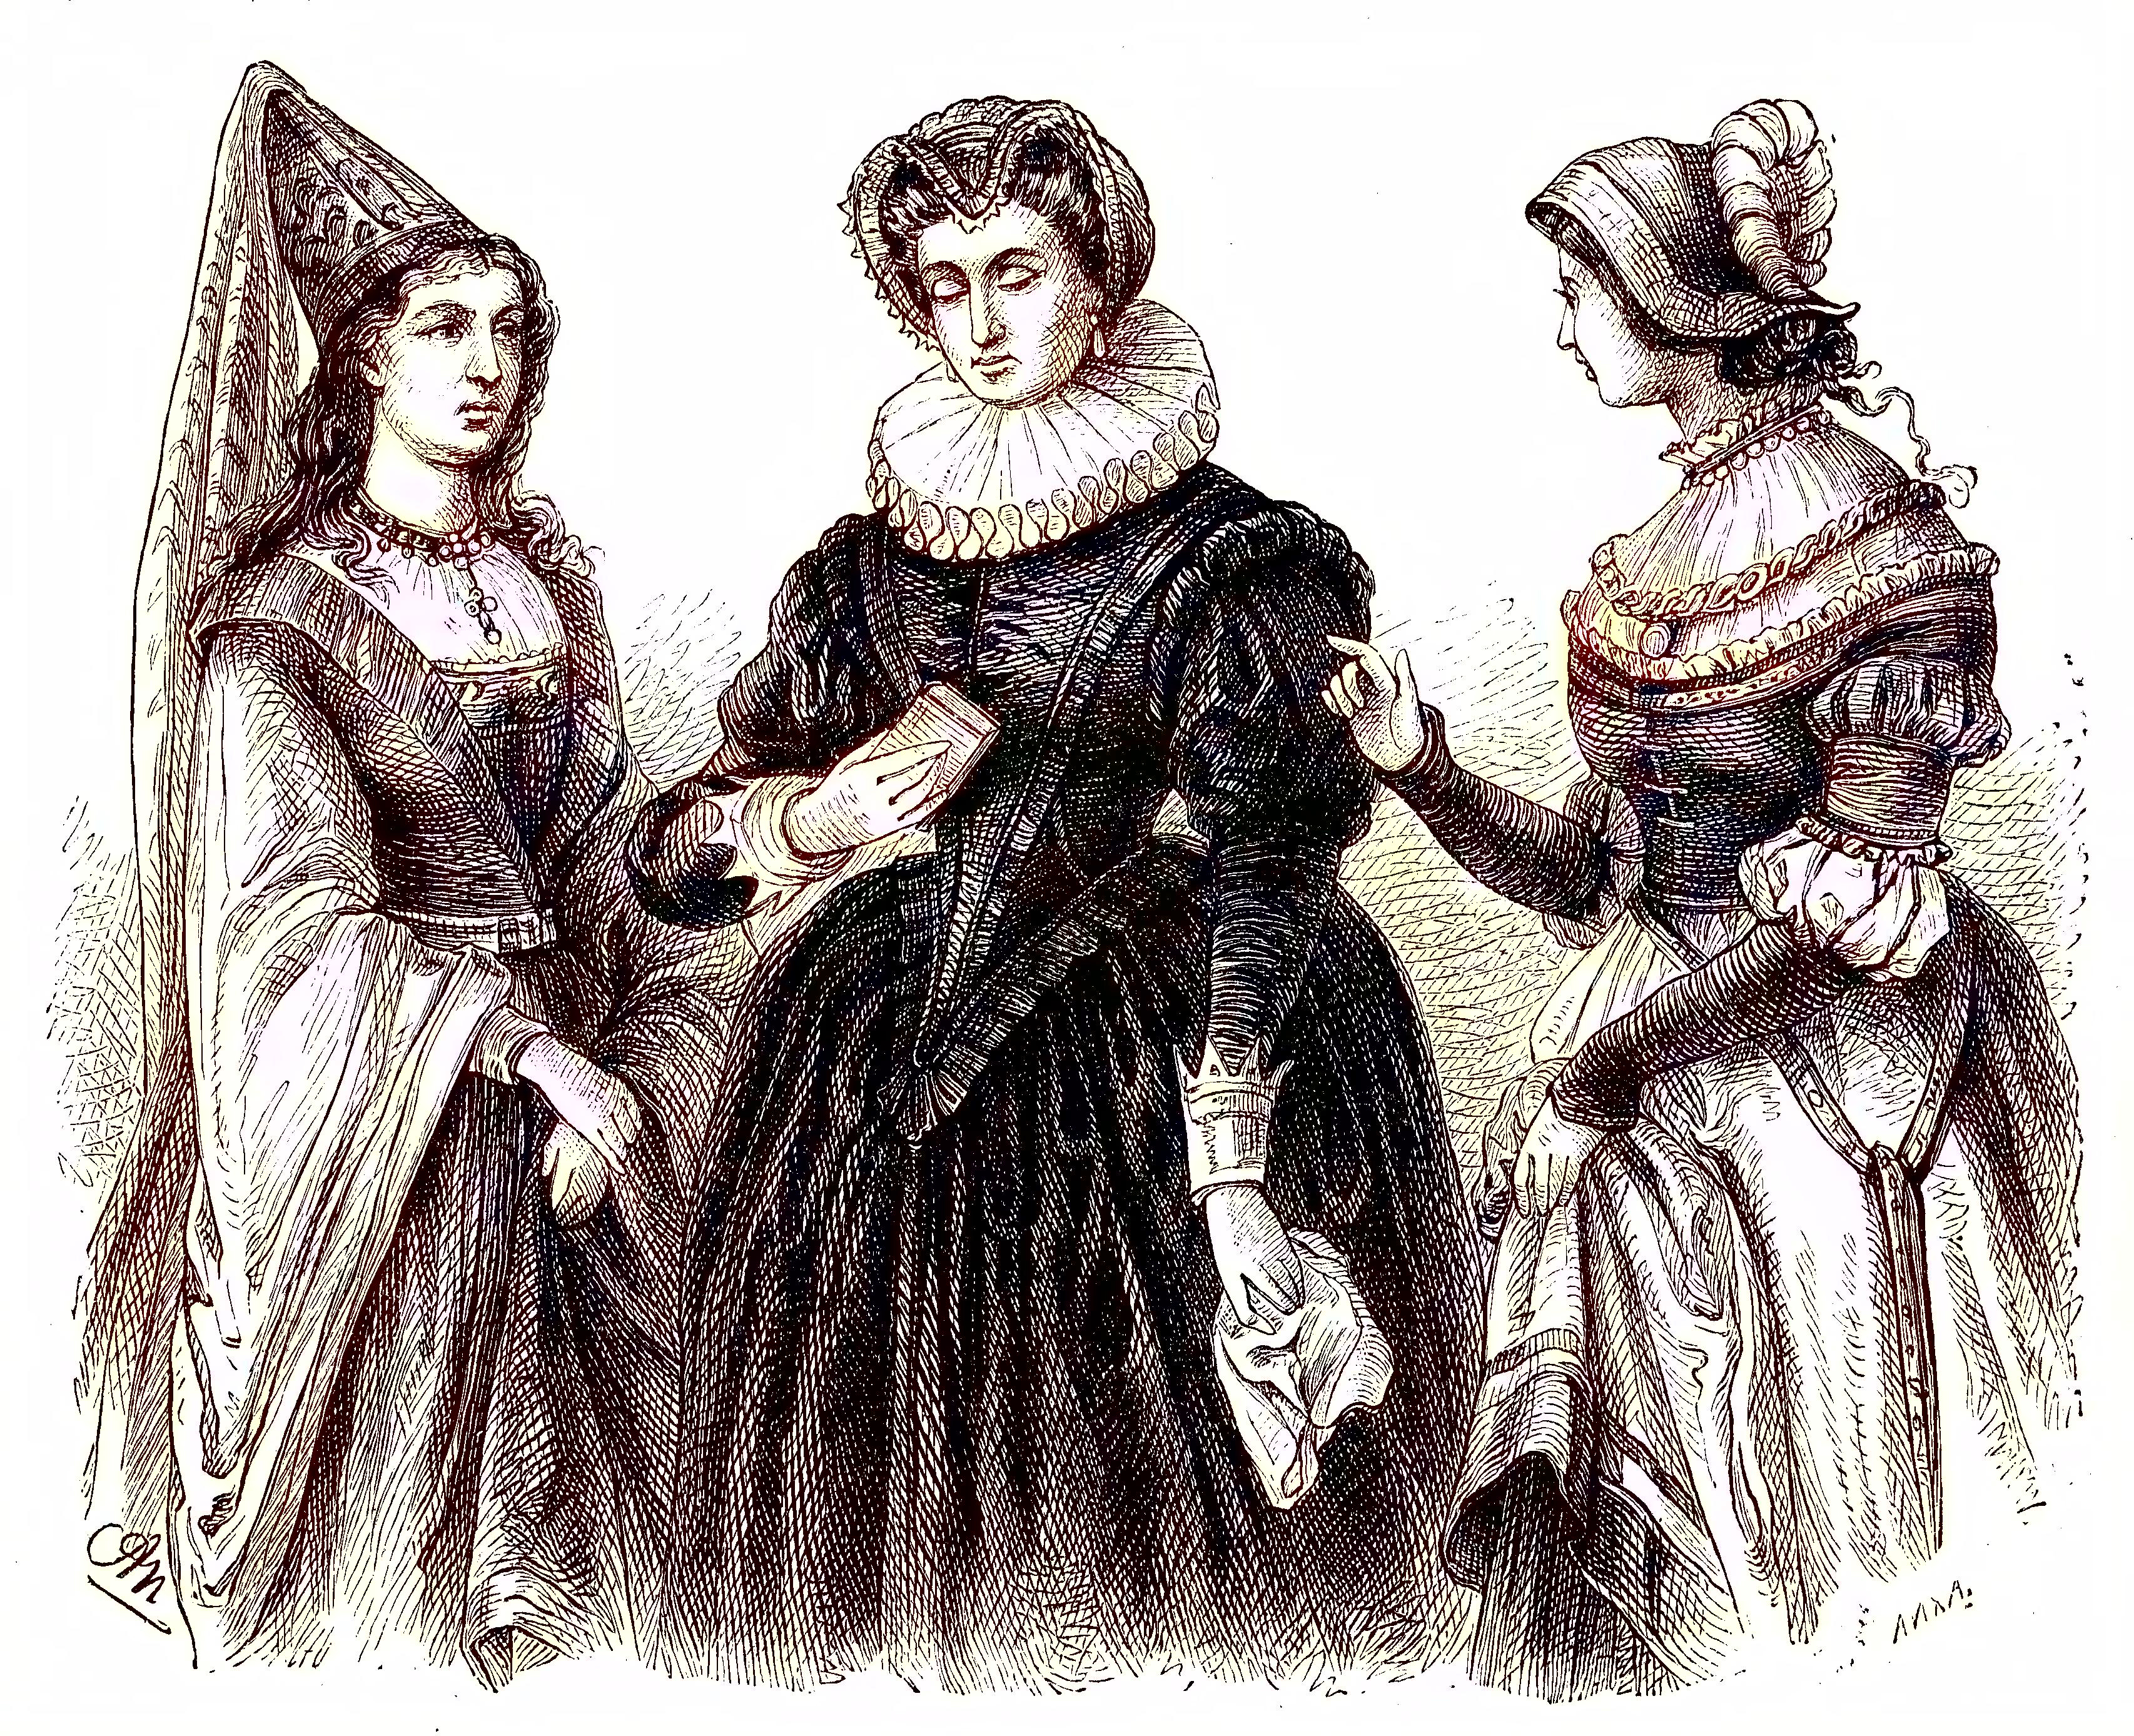 Three women in historical attire with elaborate headpieces and ruffled collars